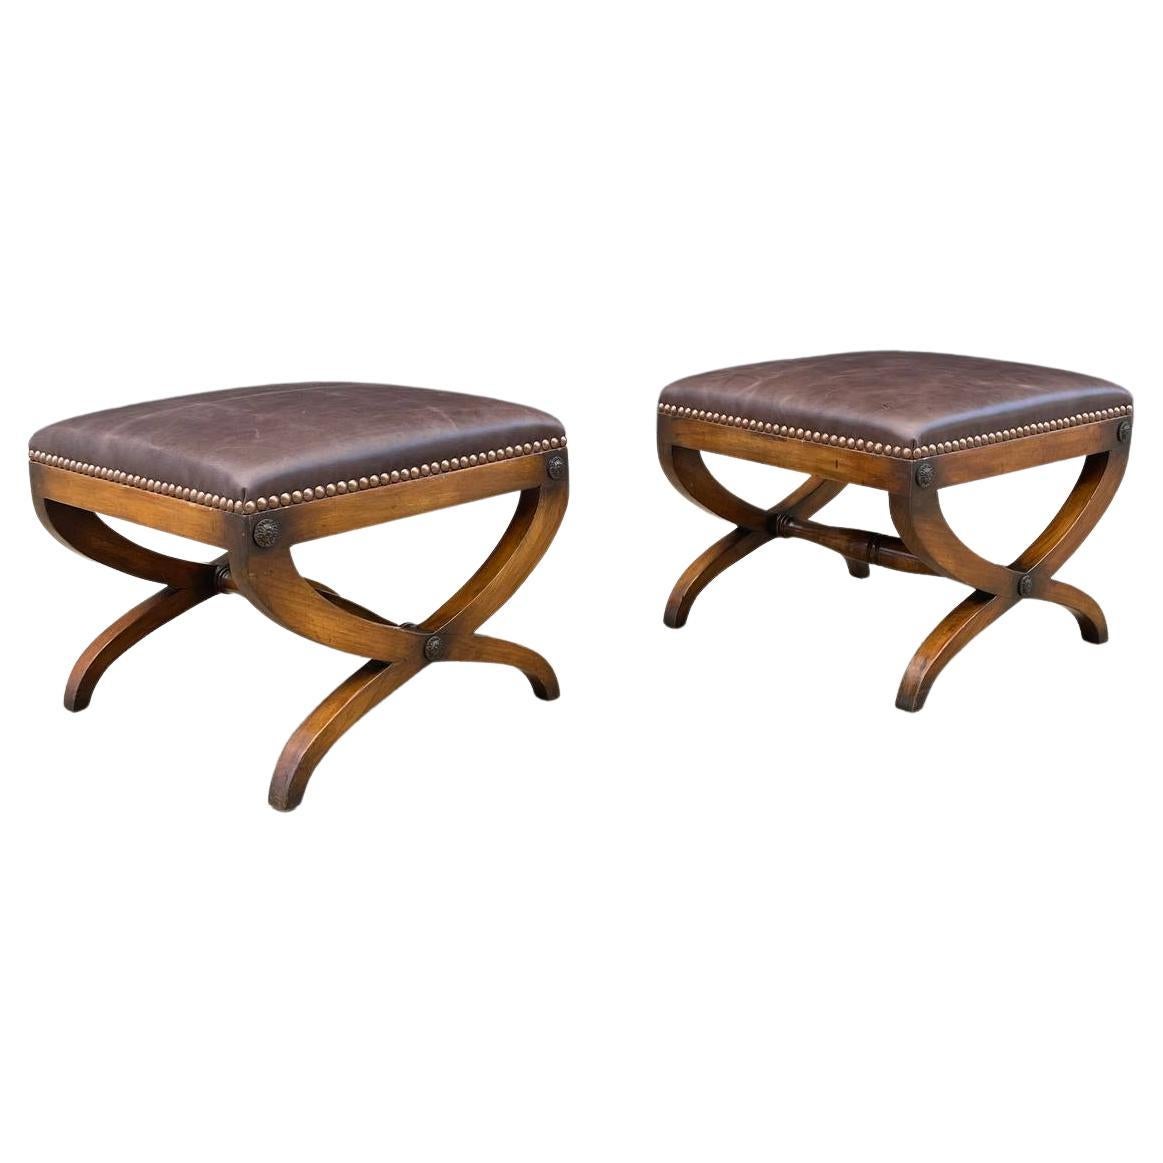 Pair of Neoclassical Style Curule Leather Benches